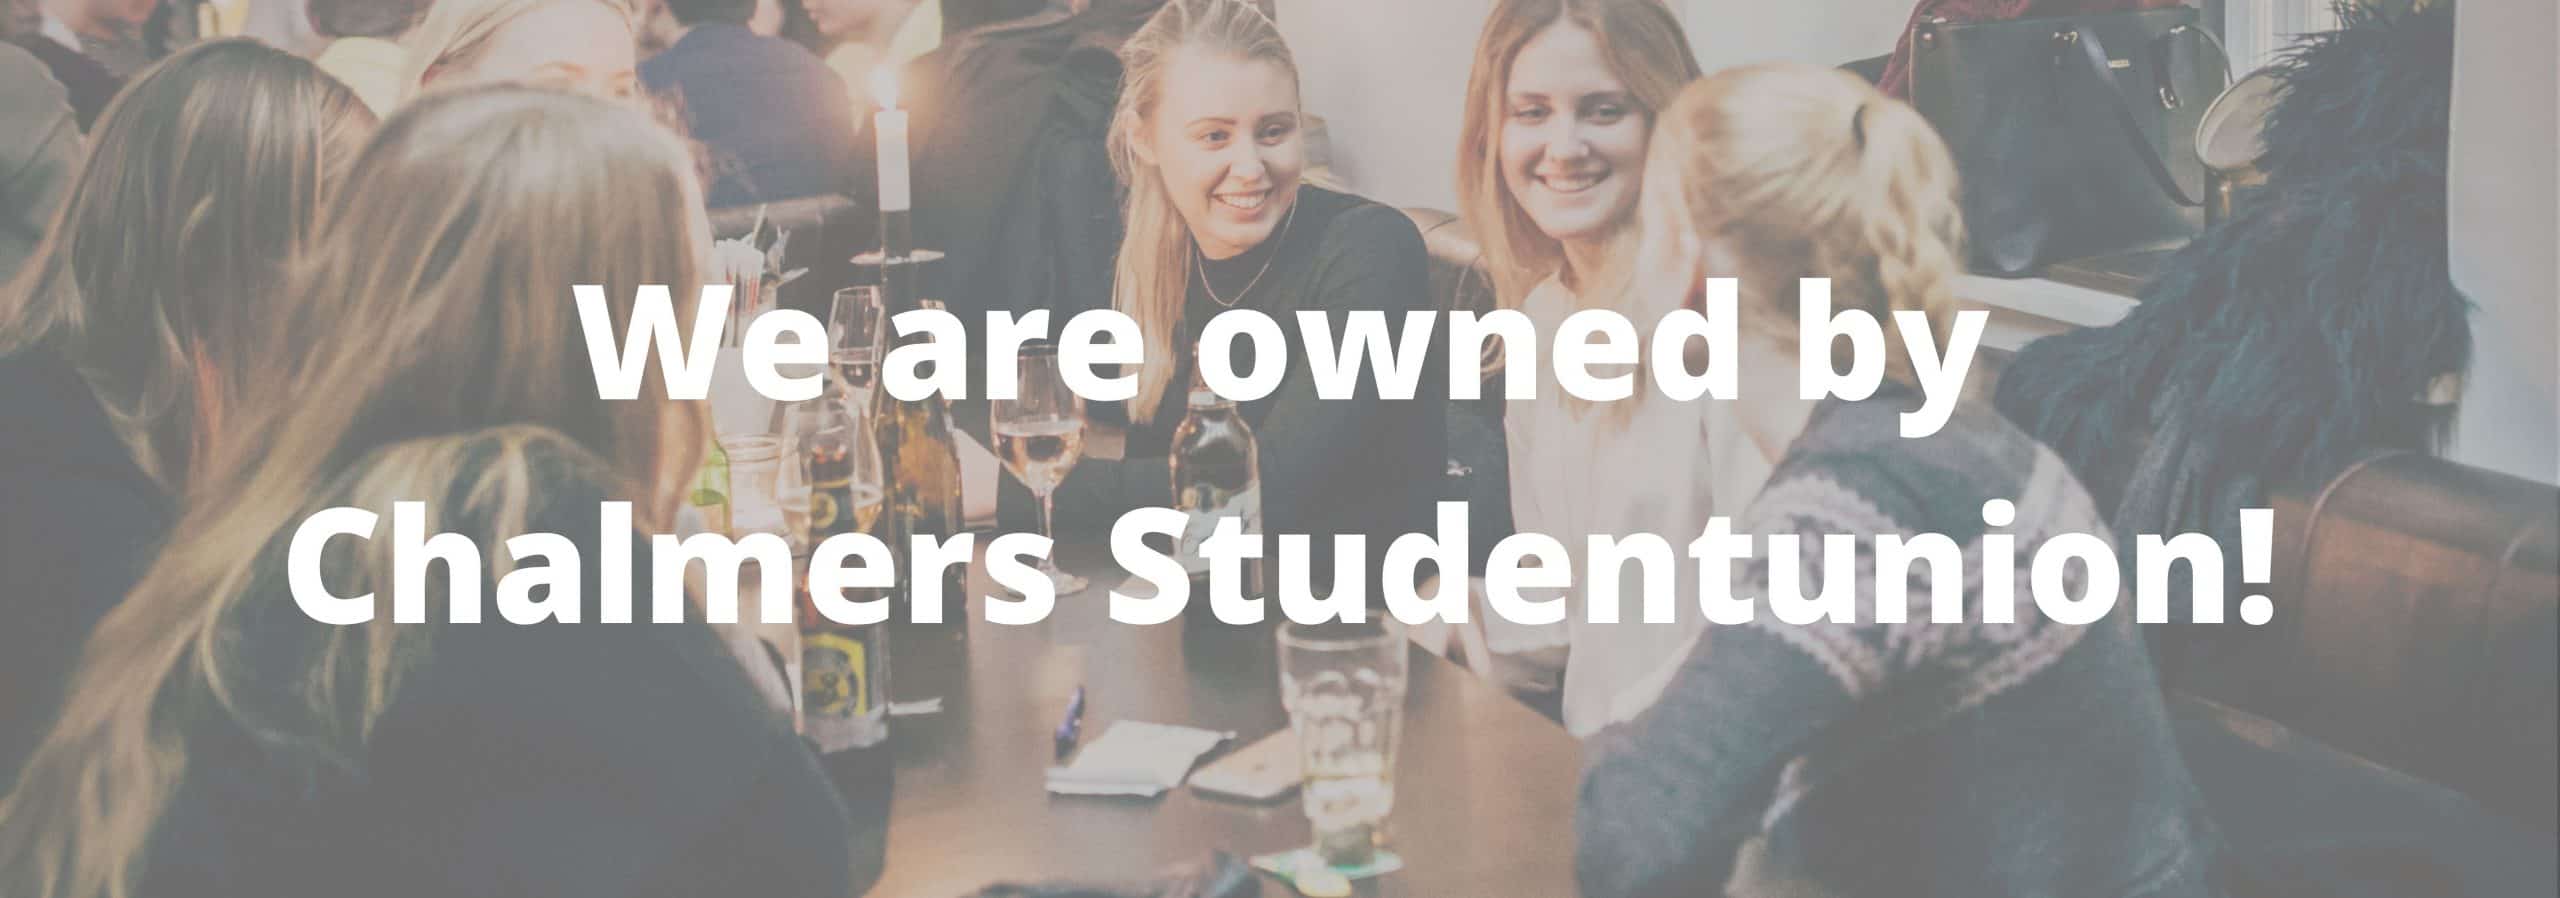 We are owned by Chalmers studentunion